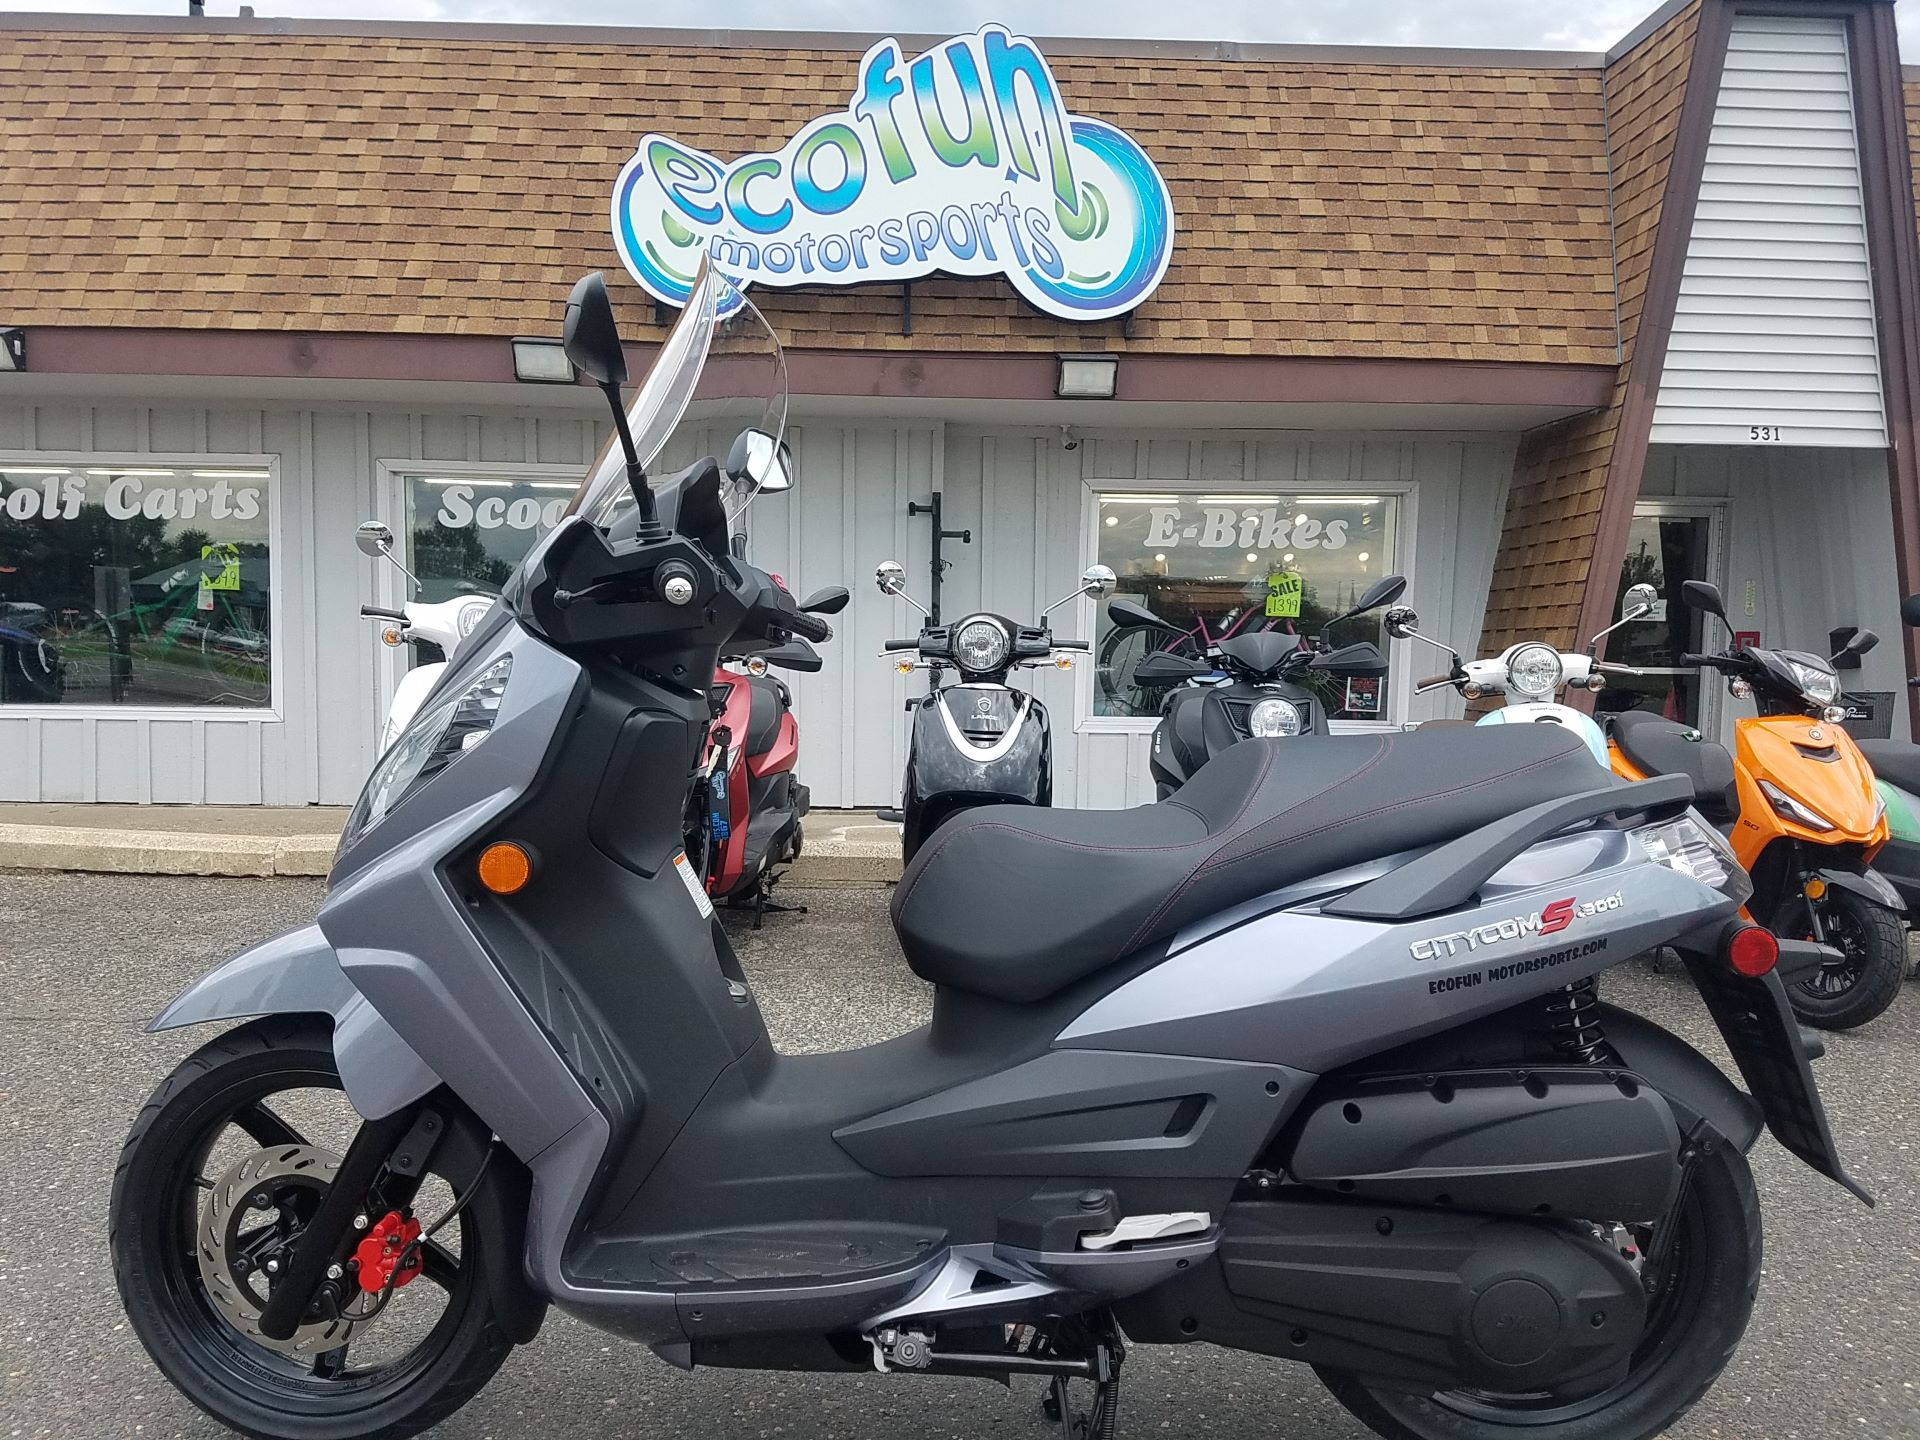 2023 SYM Citycom S 300i Scooter in Forest Lake, Minnesota - Photo 6